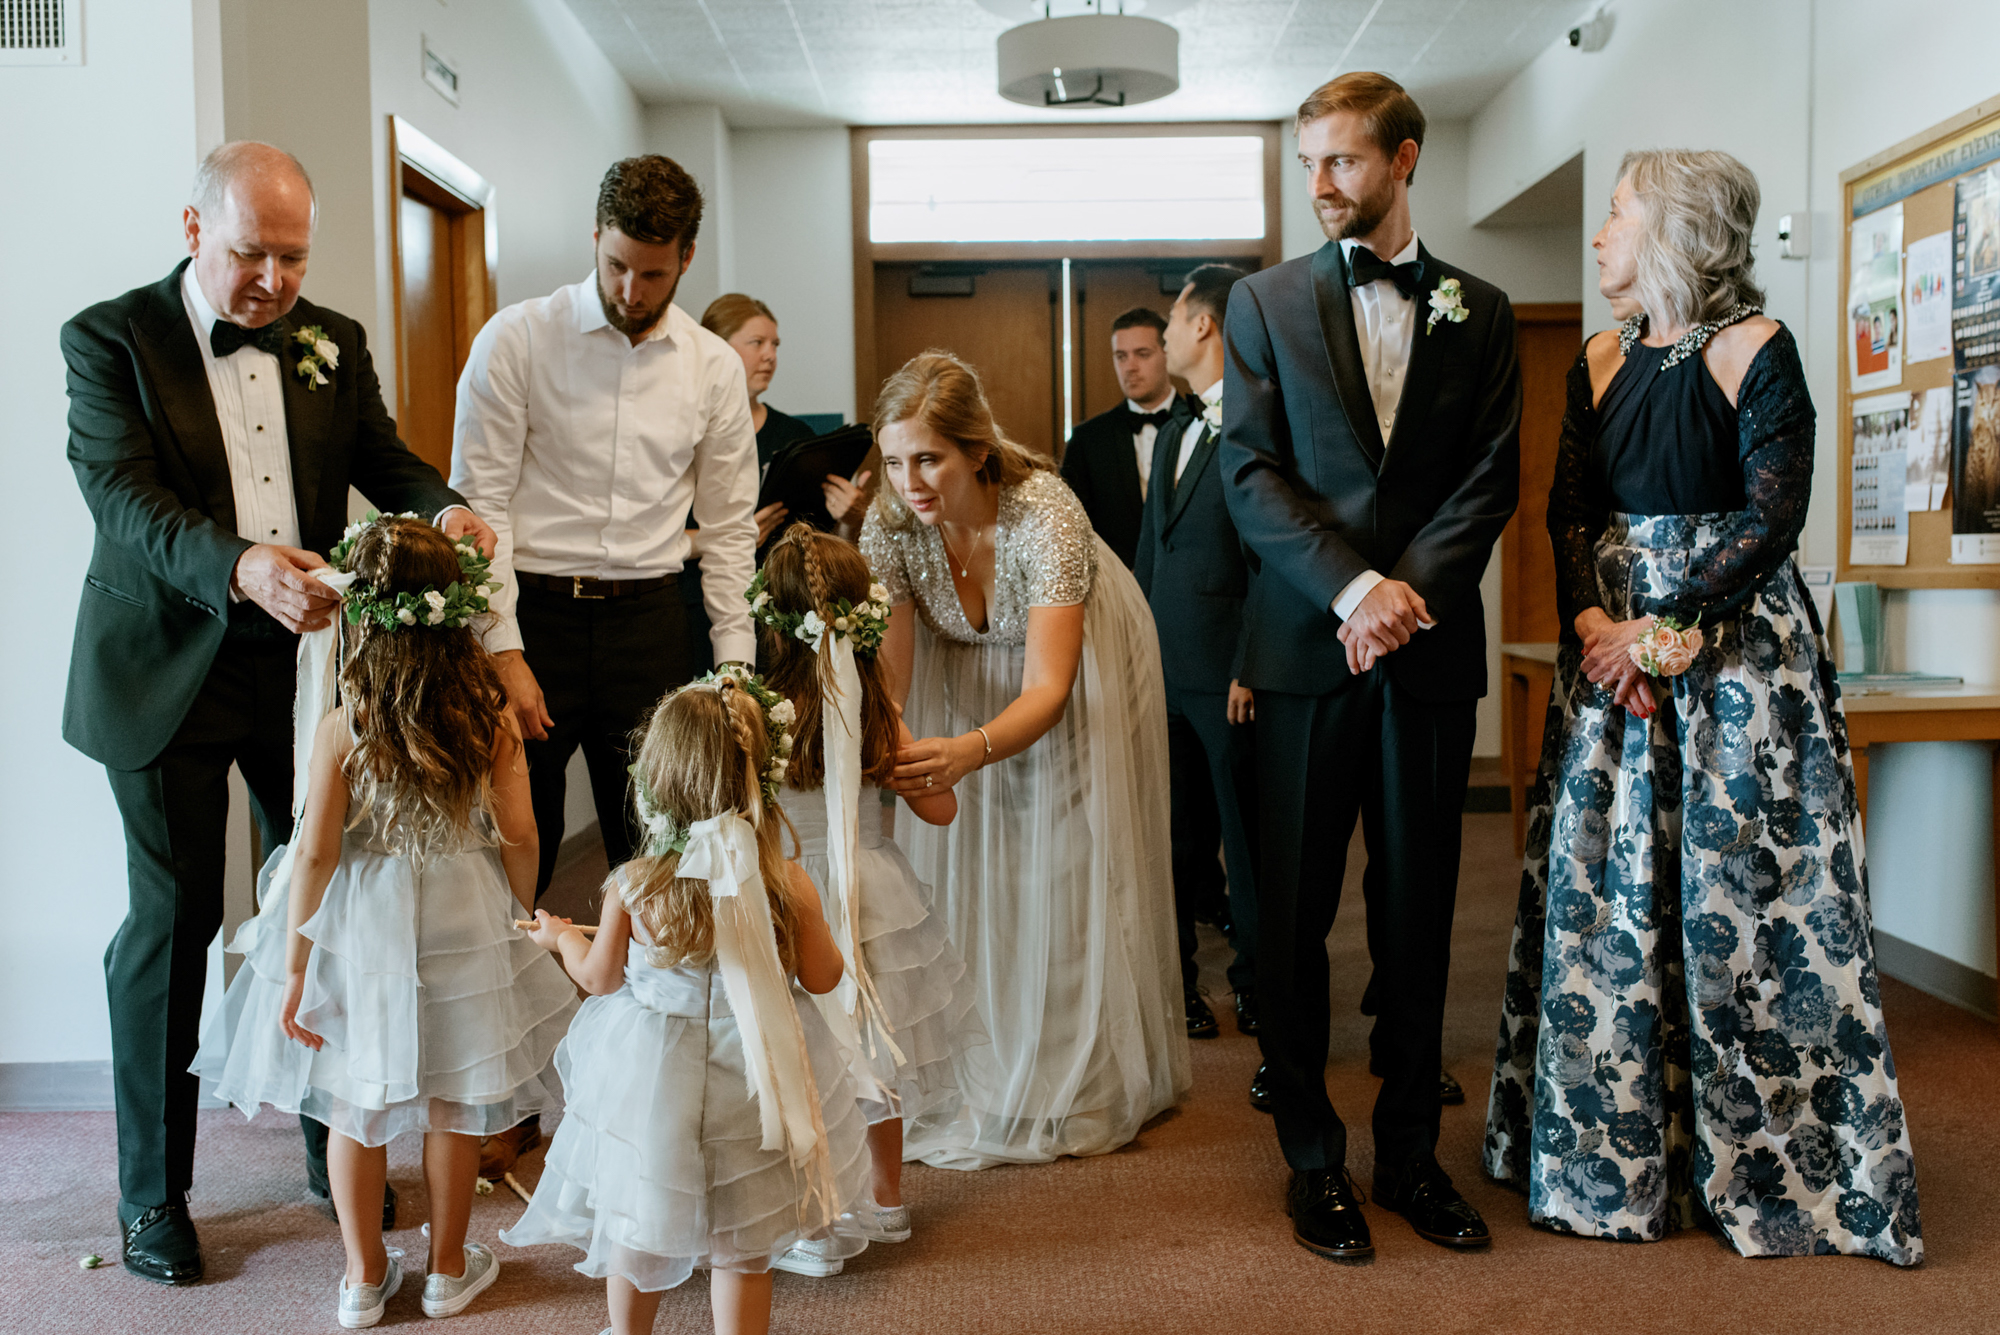 Wedding at Sacred Heart Church Seattle: Bridal party gets ready to walk down the aisle